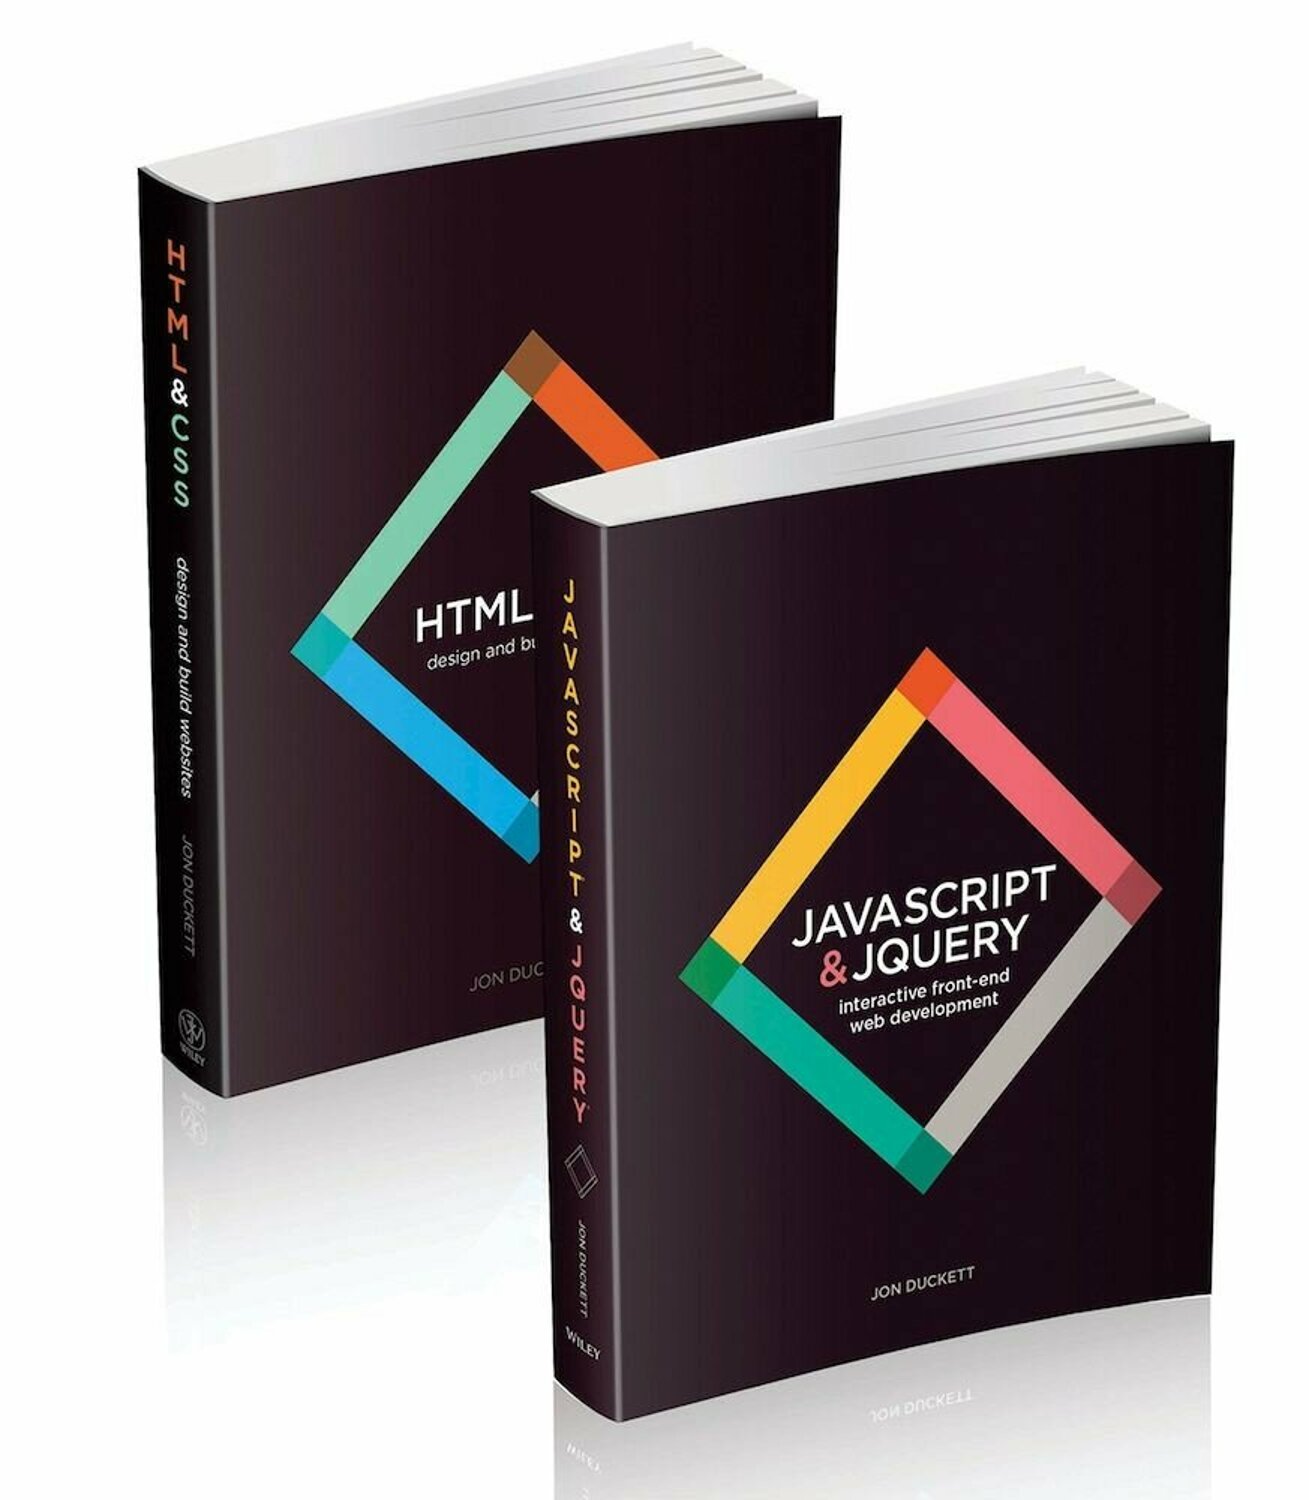 Web Design with HTML CSS Javascript and Jquery Set by Jon Duckett PDF